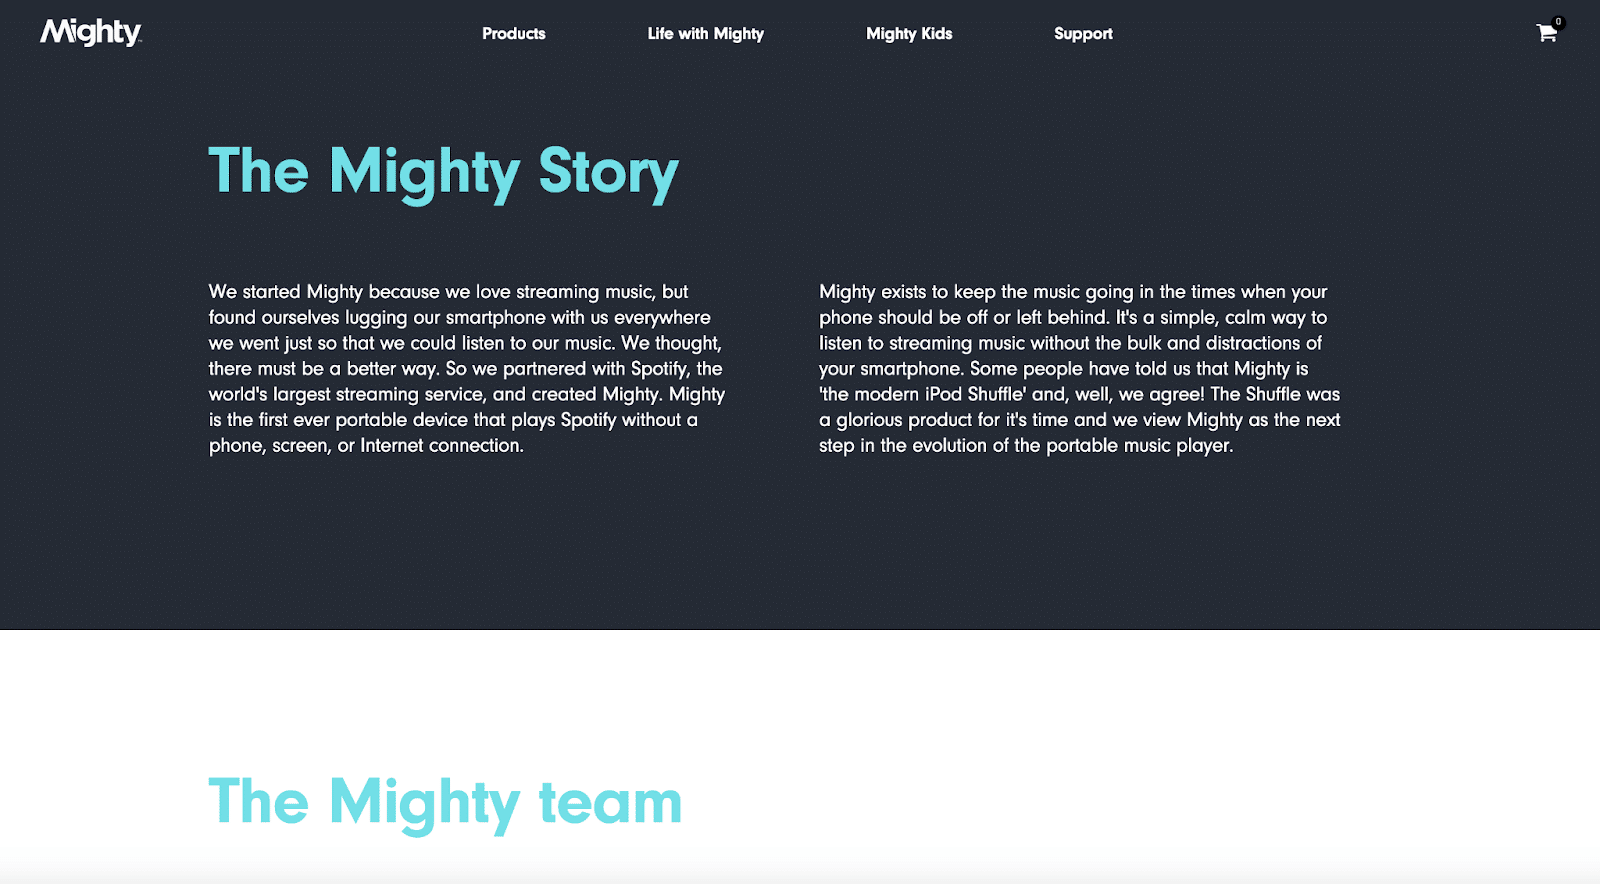 Mighty Audio introduces you to its team on its About Us page.